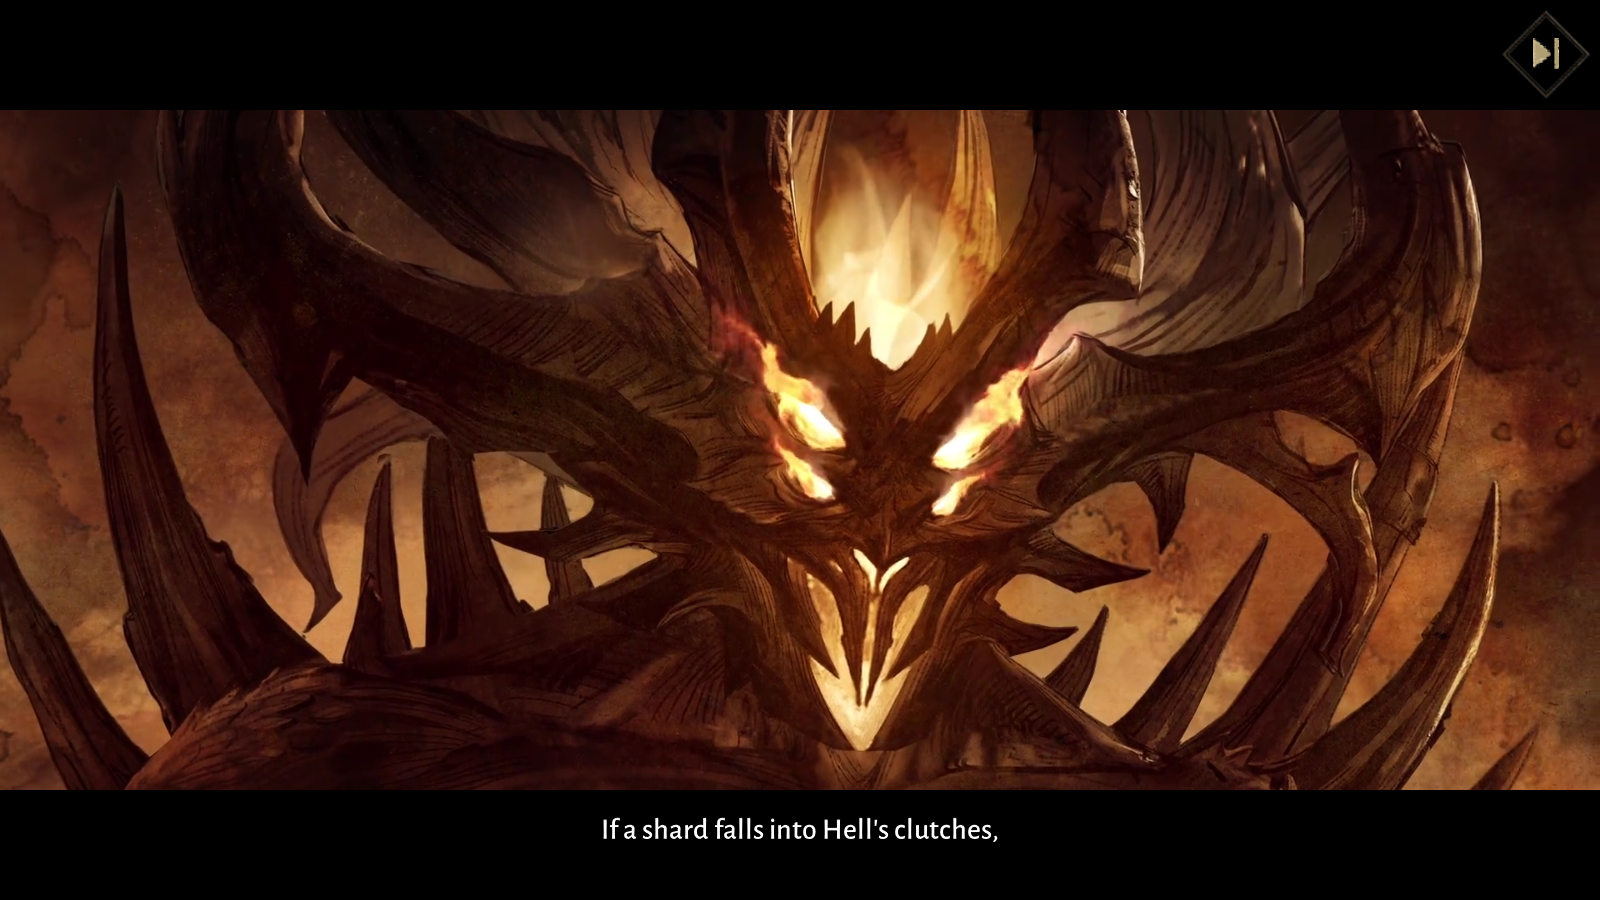 Is Diablo: Immortal a reskin of NetEase's other game